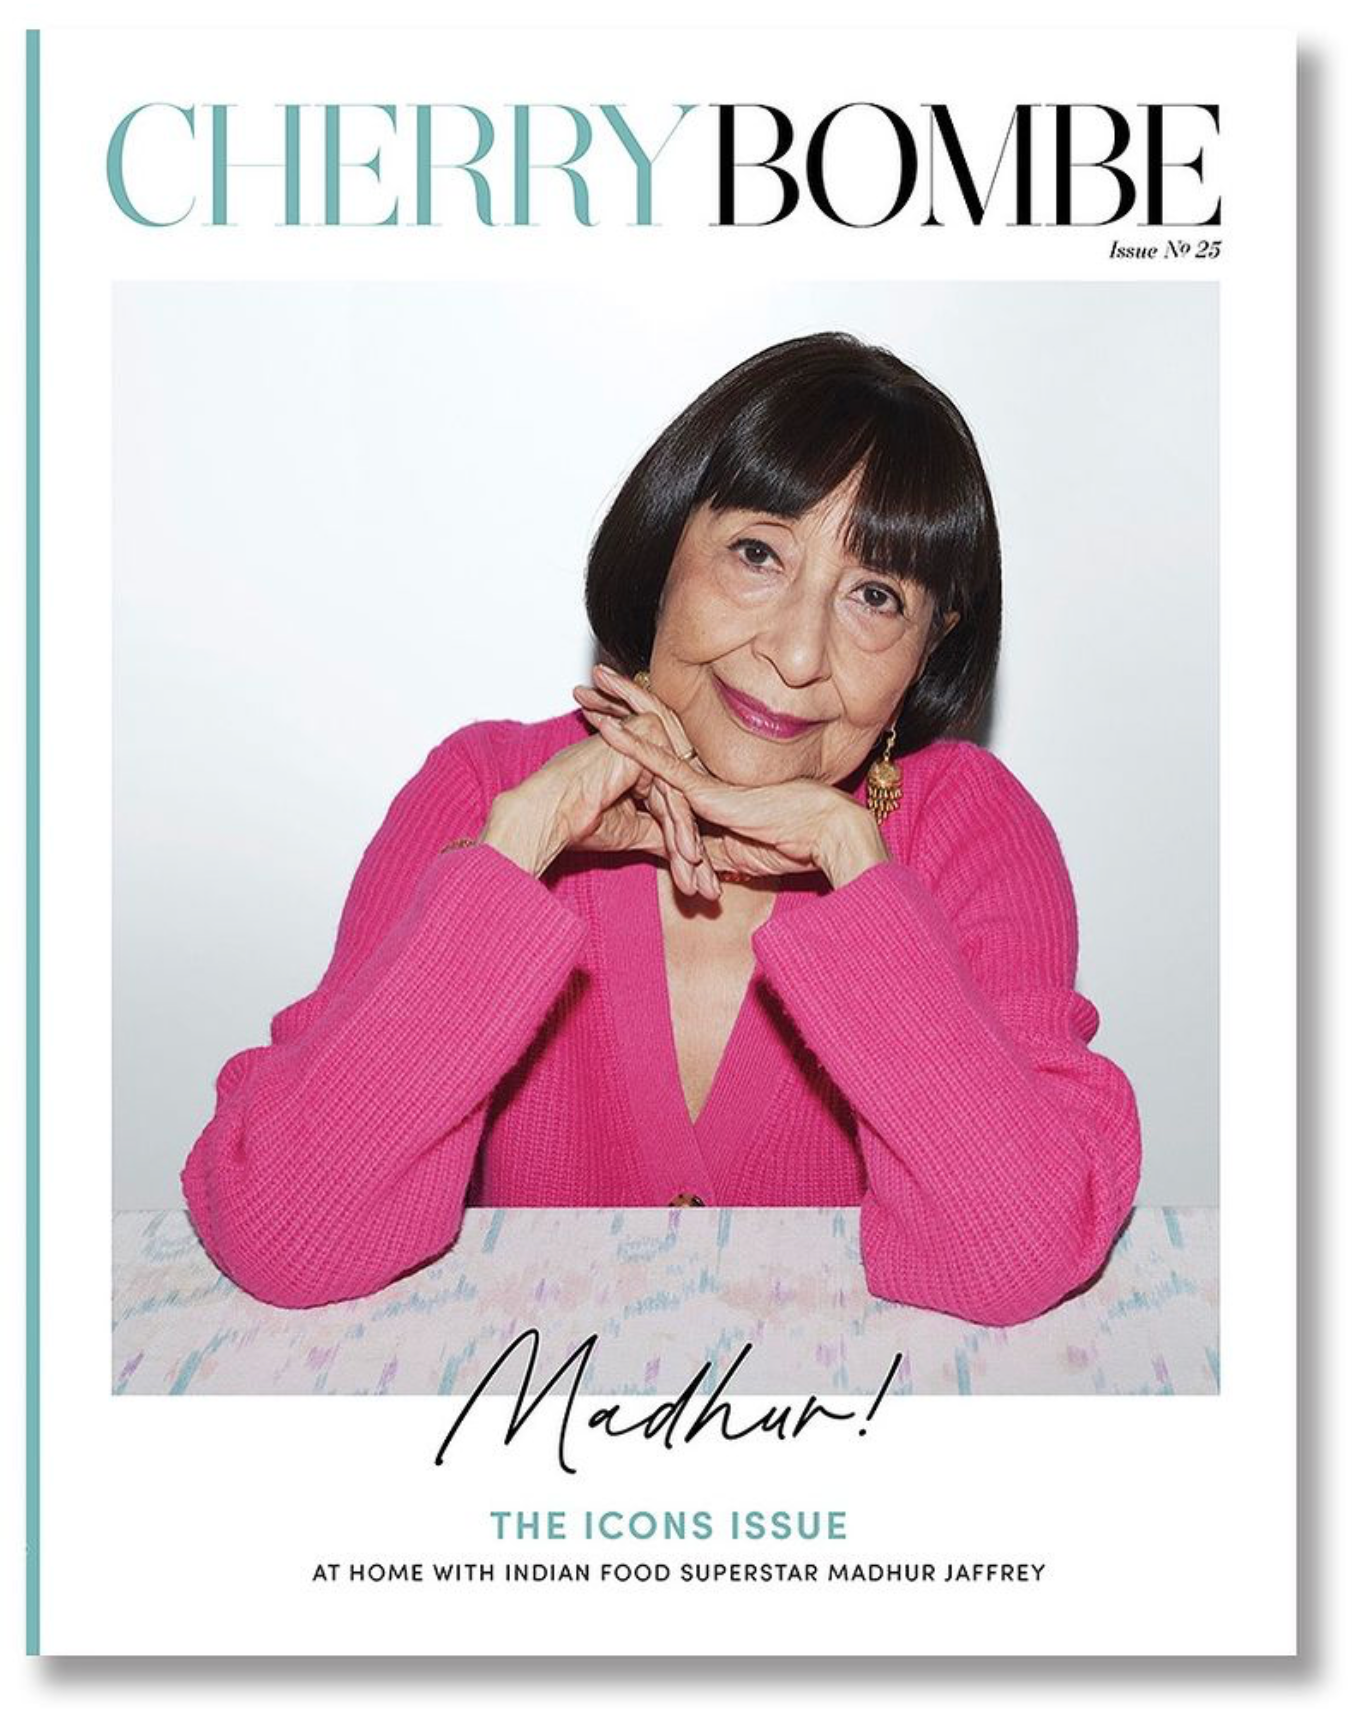 Cherry Bombe Issue Nº 25: The Icons Issue — Madhur Jaffrey